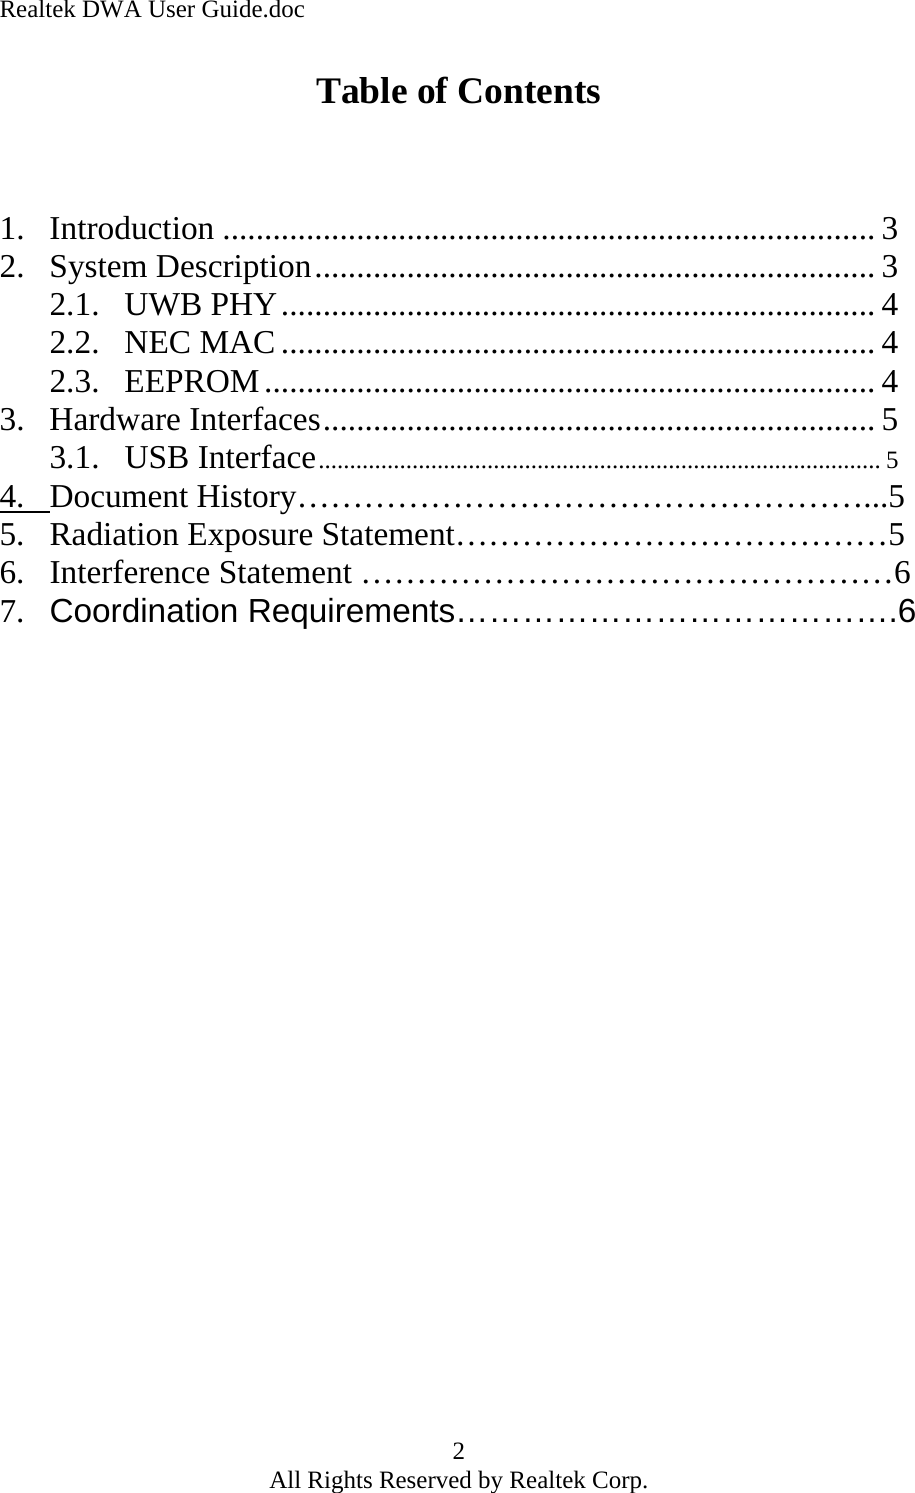 Realtek DWA User Guide.doc Table of Contents    1. Introduction .............................................................................. 3 2. System Description................................................................... 3 2.1. UWB PHY....................................................................... 4 2.2. NEC MAC....................................................................... 4 2.3. EEPROM......................................................................... 4 3. Hardware Interfaces.................................................................. 5 3.1. USB Interface.......................................................................................... 5 4.   Document History……………………………………………...55.   Radiation Exposure Statement…………………………………5 6.   Interference Statement …………………………………………6 7.   Coordination Requirements………………………………….6     2 All Rights Reserved by Realtek Corp. 